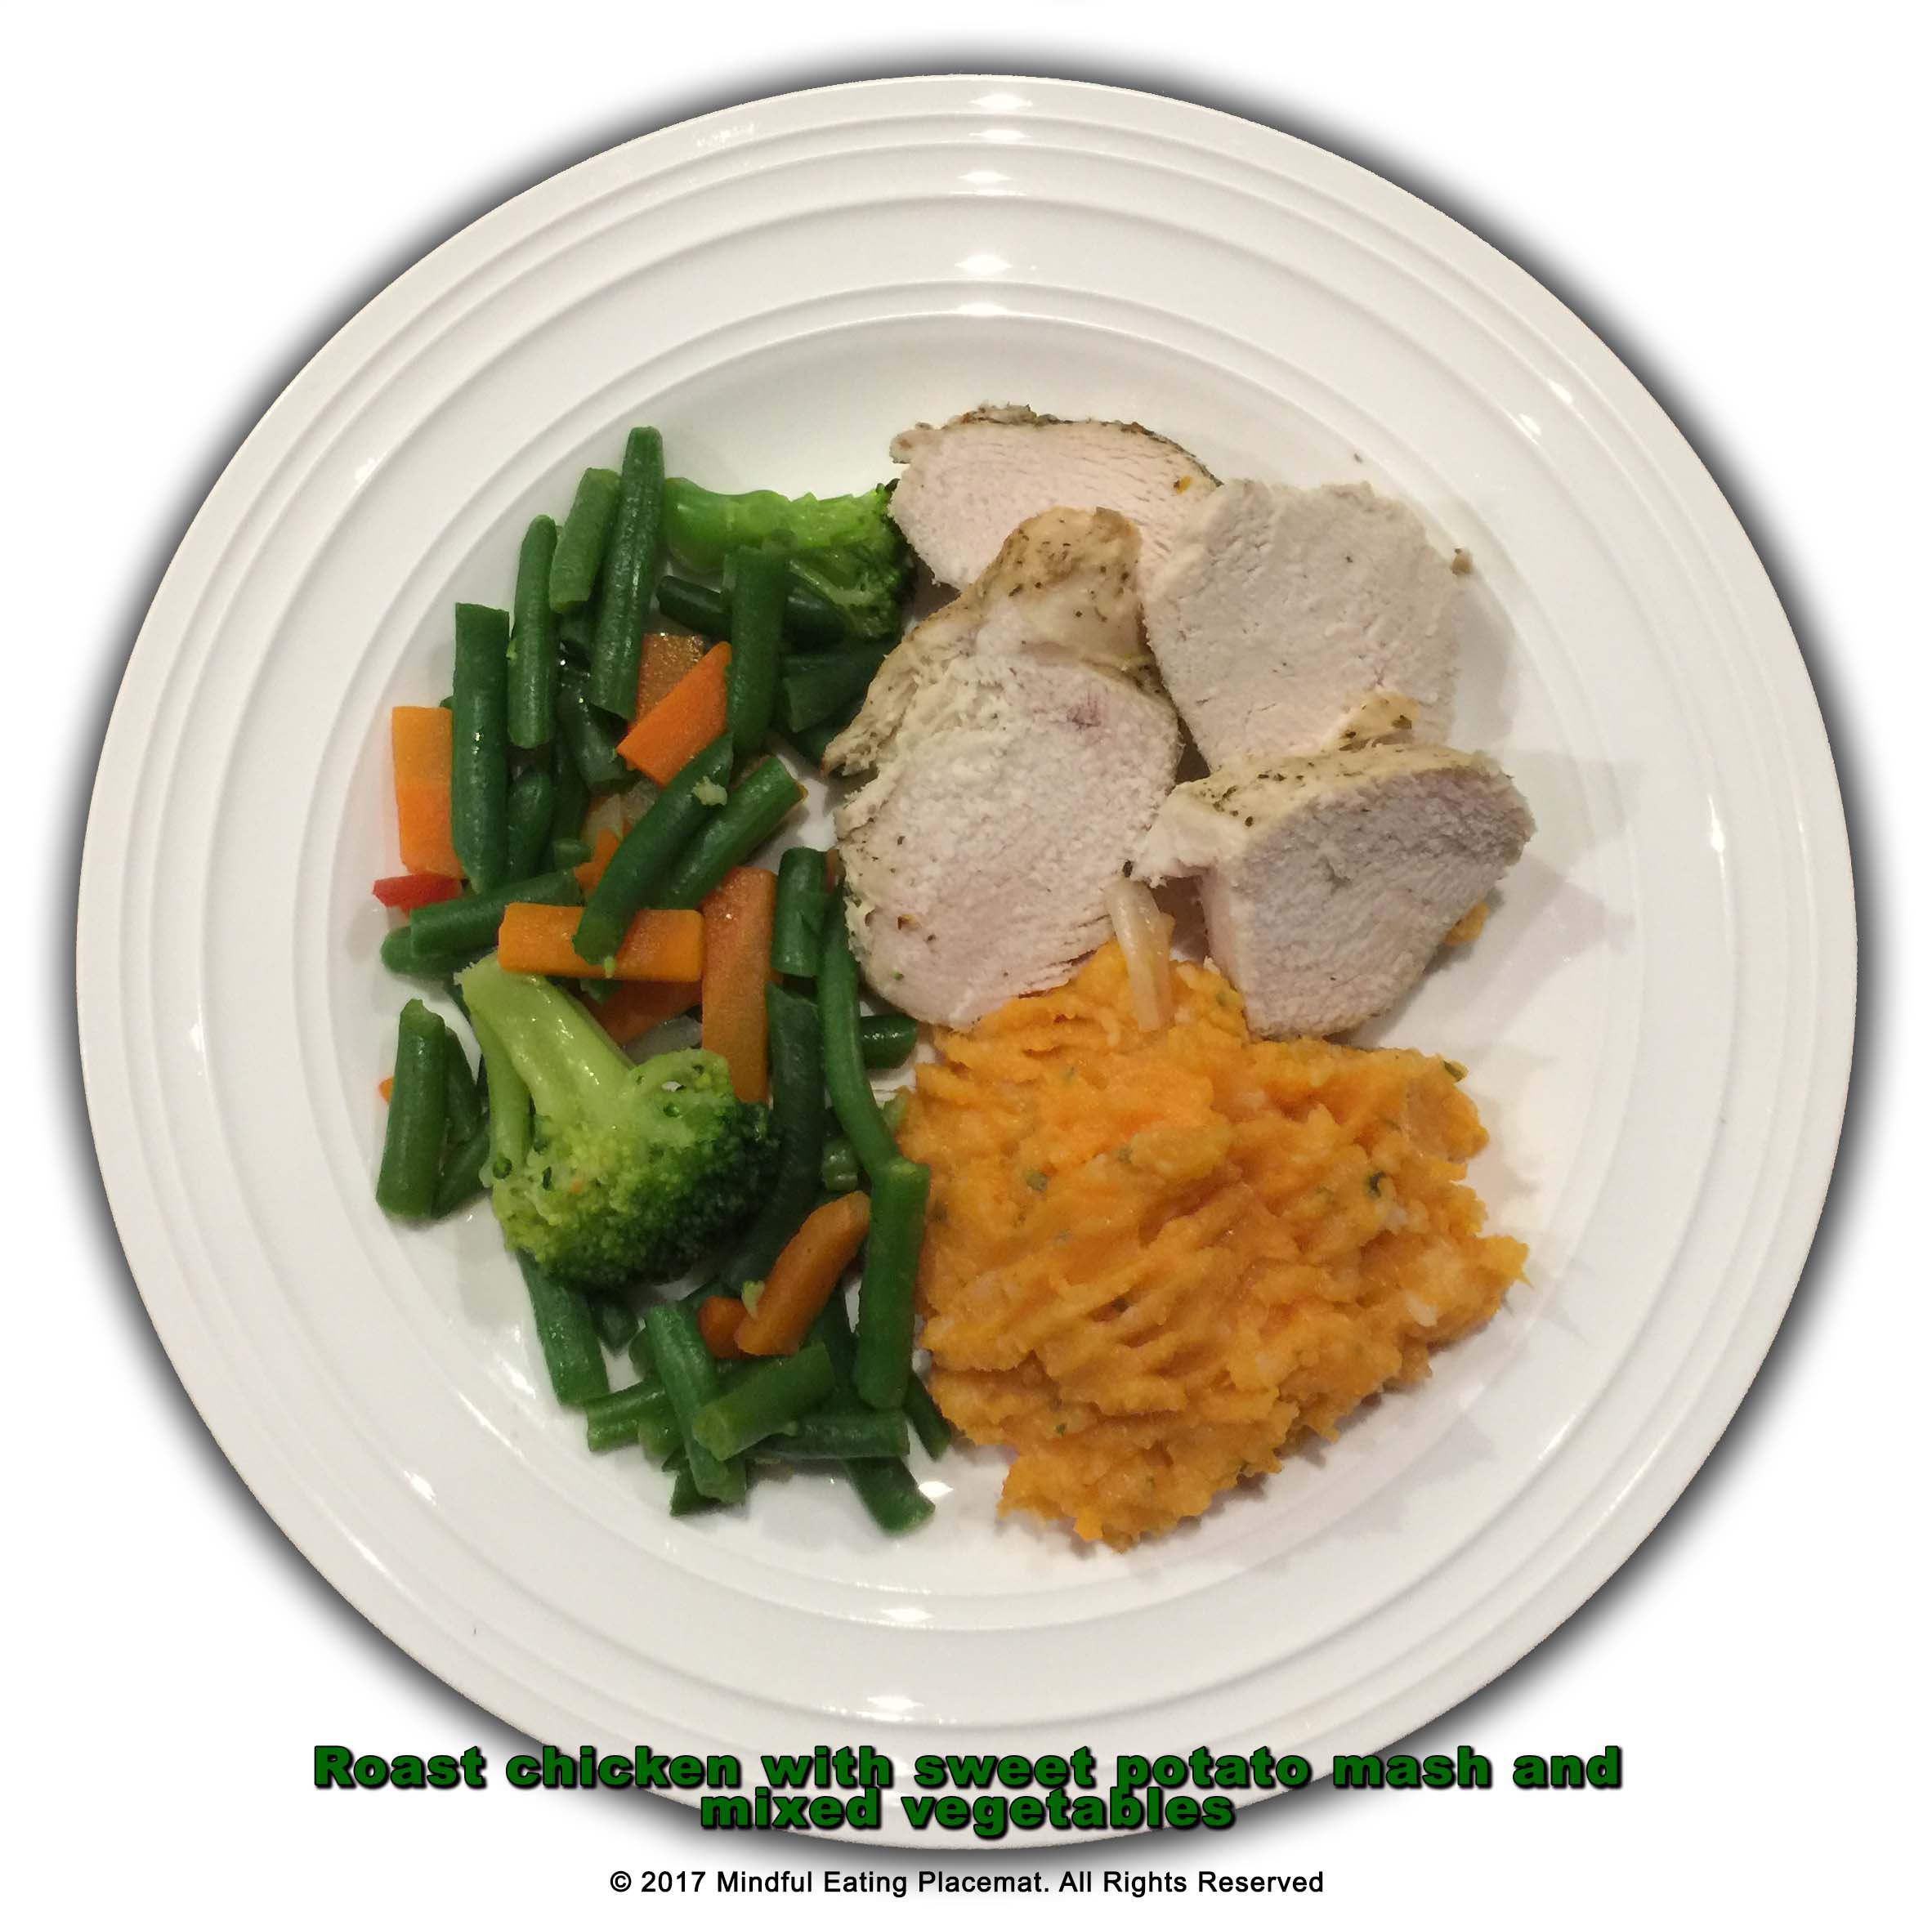 Poached chicken with sweet potato mash and beans, carrots and broccoli